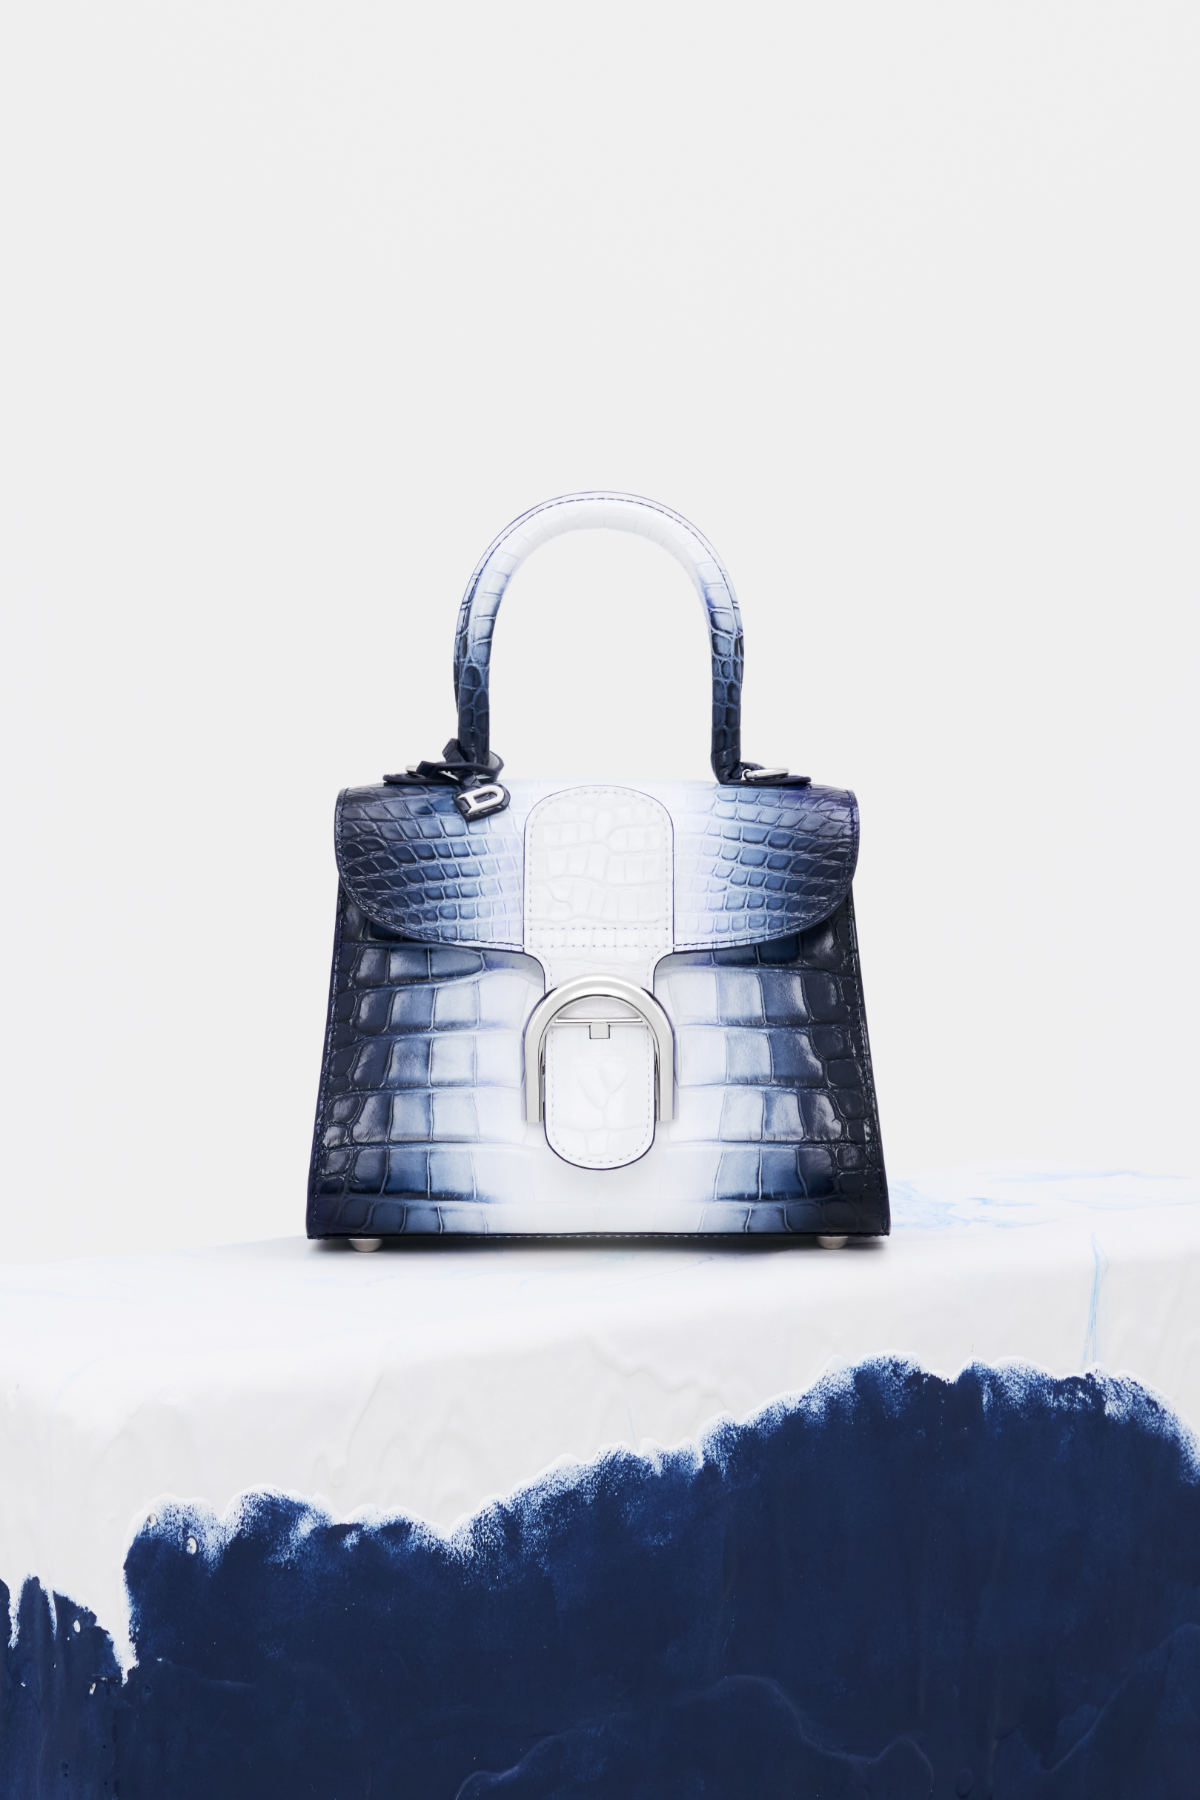 Delvaux - Elegance and ease. Freedom and refinement. Meet the Pin Mini  Bucket Canvas. Explore the entire collection at eu.delvaux.com and in  Delvaux boutiques worldwide. #DelvauxBrillant